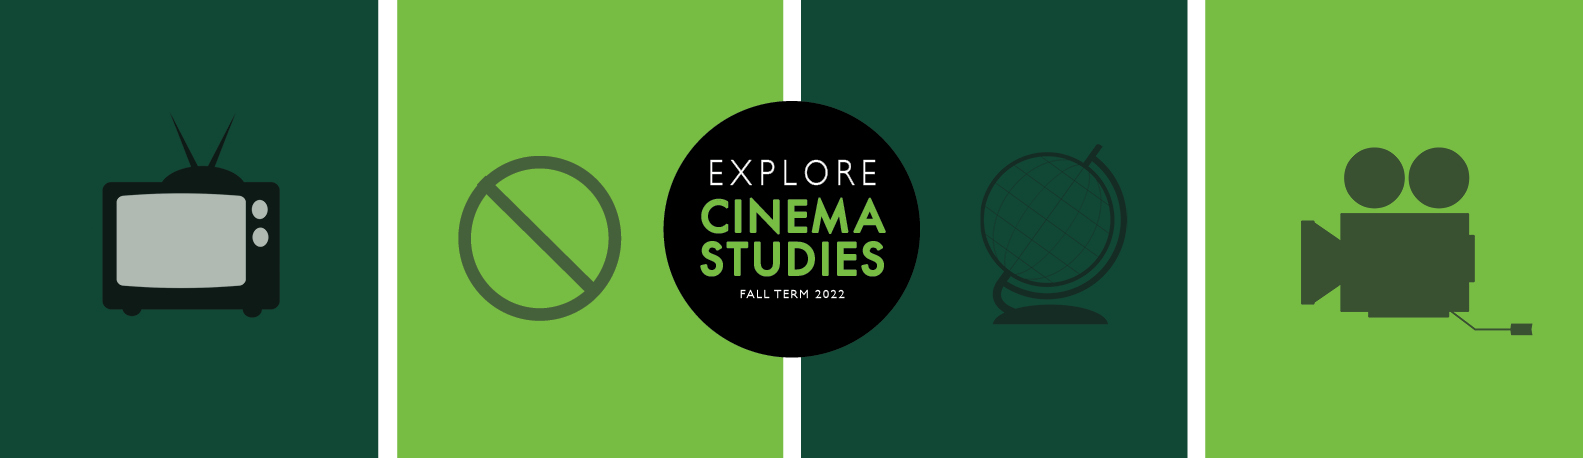 Explore cinema studies fall 2022. Illustrations of a television, circle with a line through it, globe, and video camera